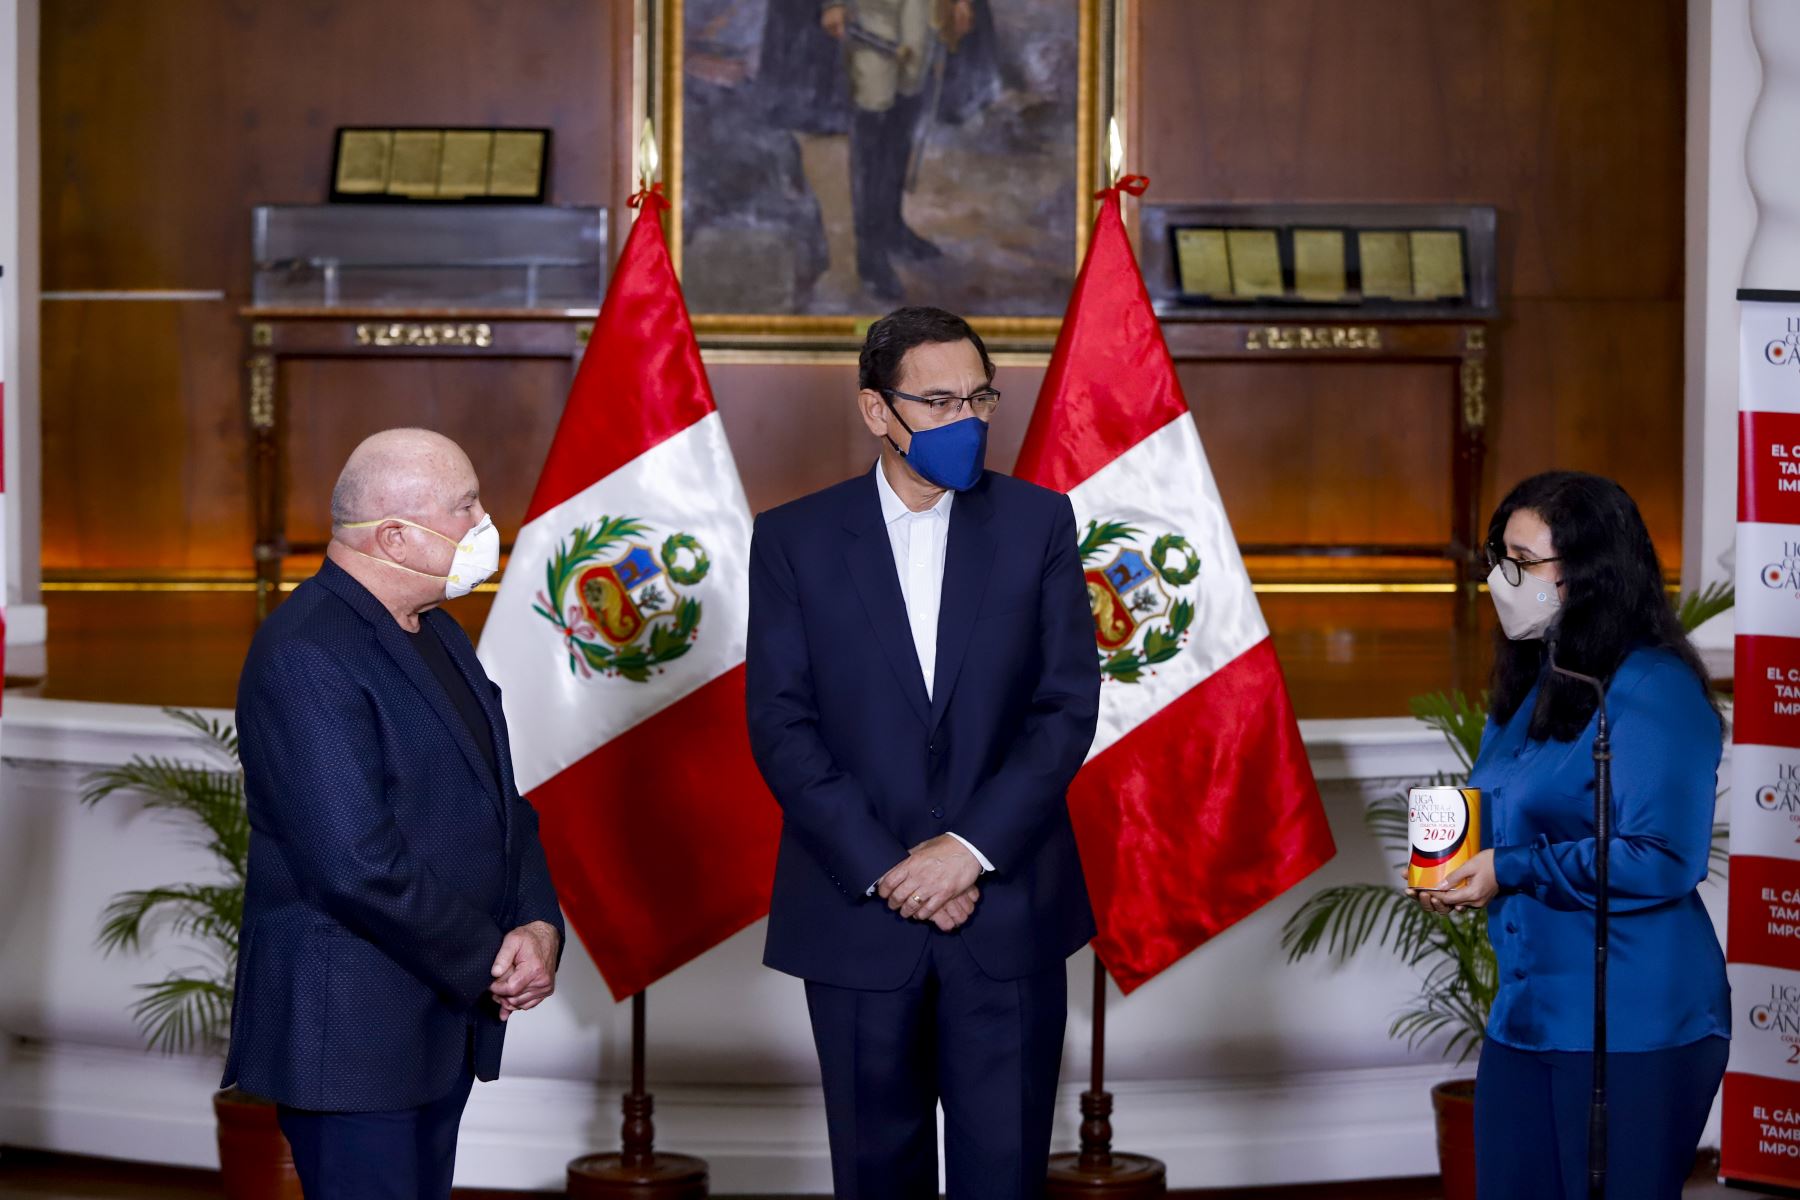 Peruvian President Martin Vizcarra and First Lady Maribel Diaz join the first online fundraising initiative "El Cancer También Importa" (Cancer matters too). Photo: ANDINA/Presidency of the Republic.